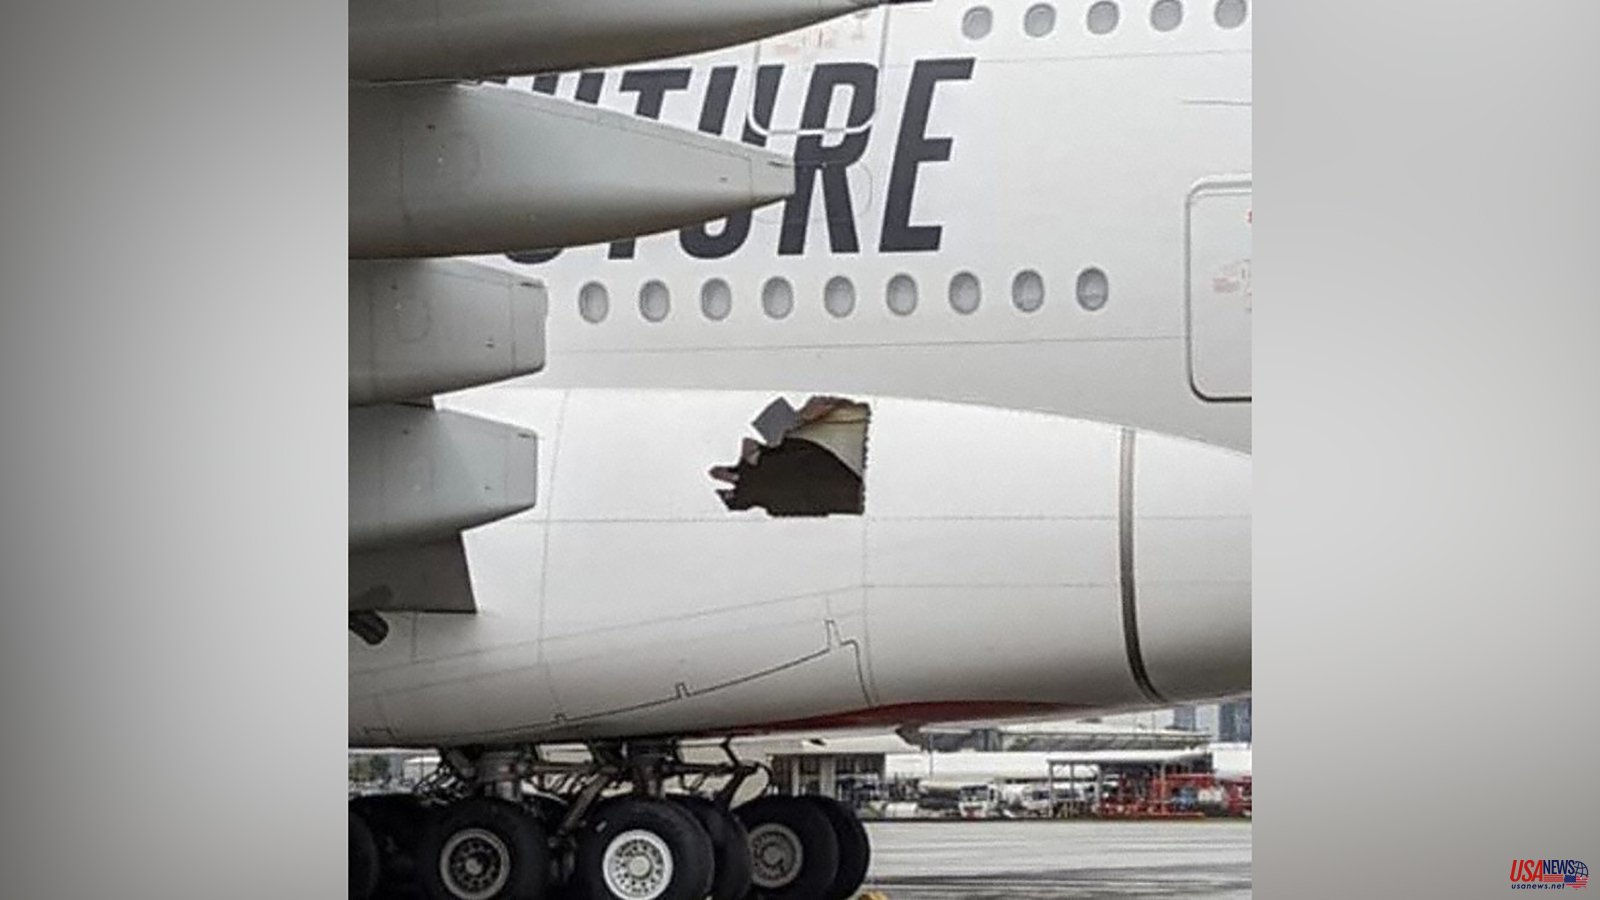 Airbus A380 flew 14 hours with hole in the side